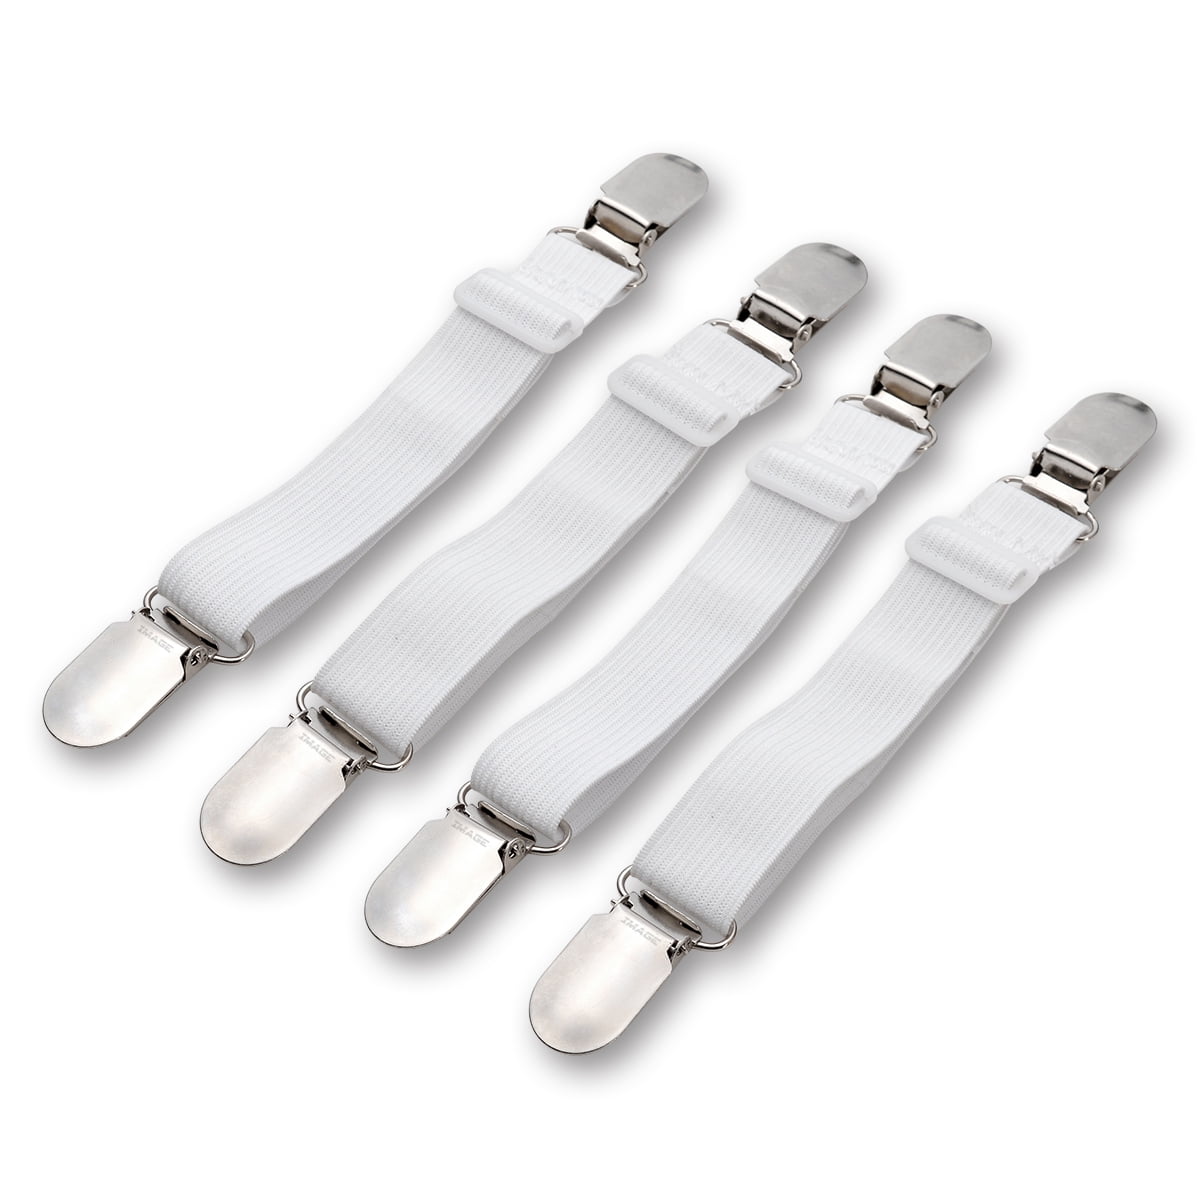 Details about   4x Bed Sheet Mattress Blankets Grippers Elastic Clip Holder Strap Fasteners Set 